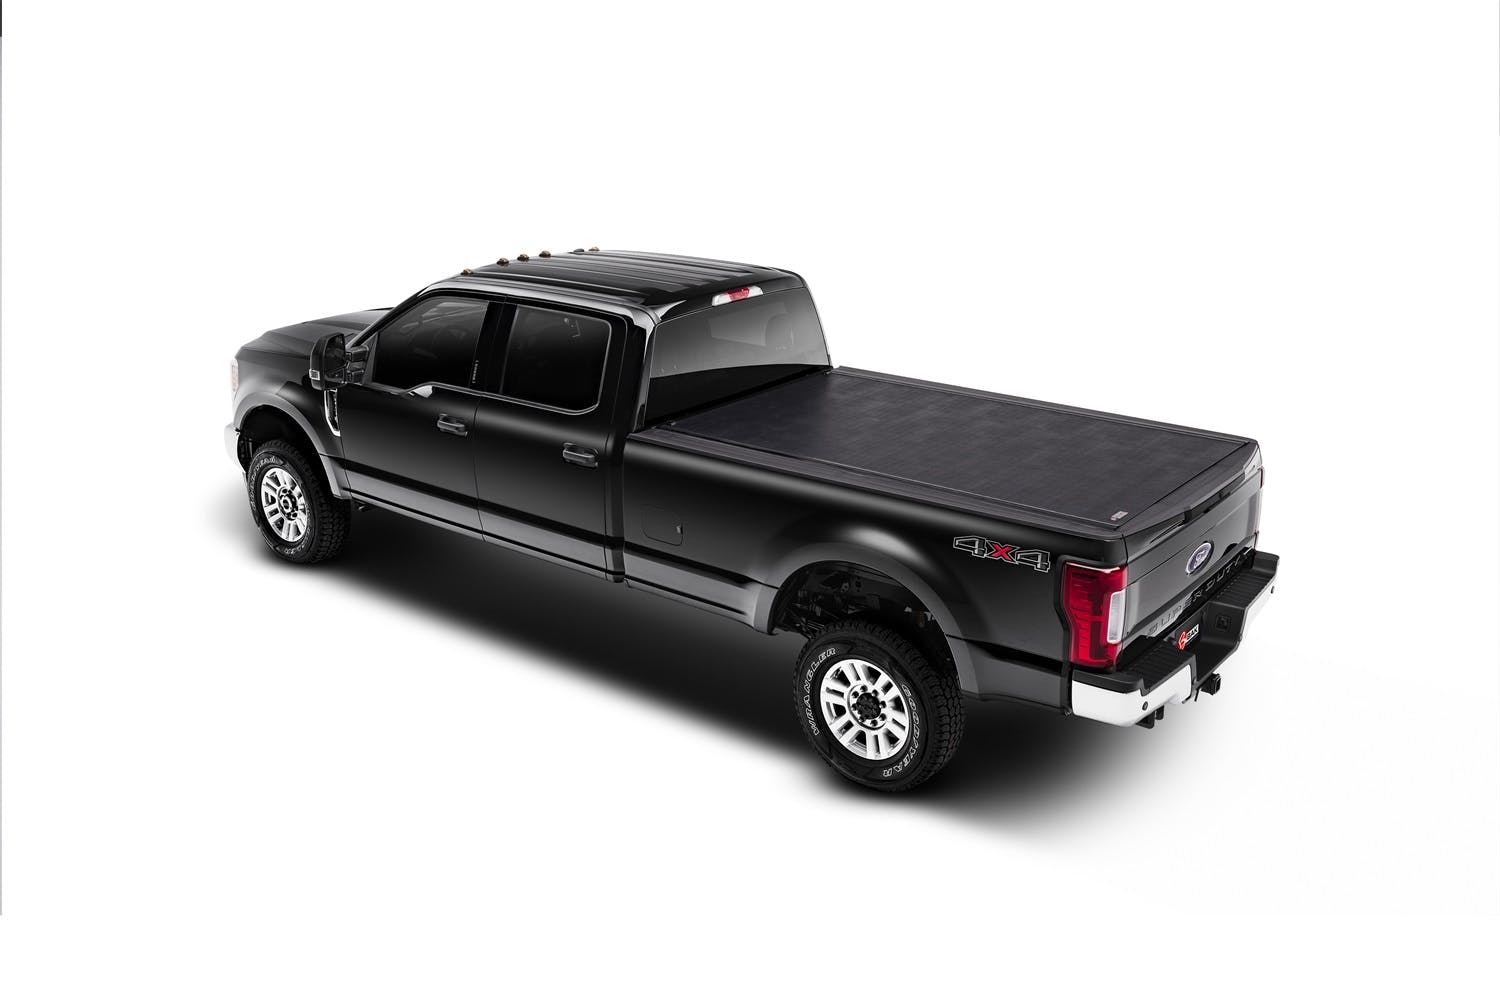 BAK Industries 39303 Revolver X2 Hard Rolling Truck Bed Cover